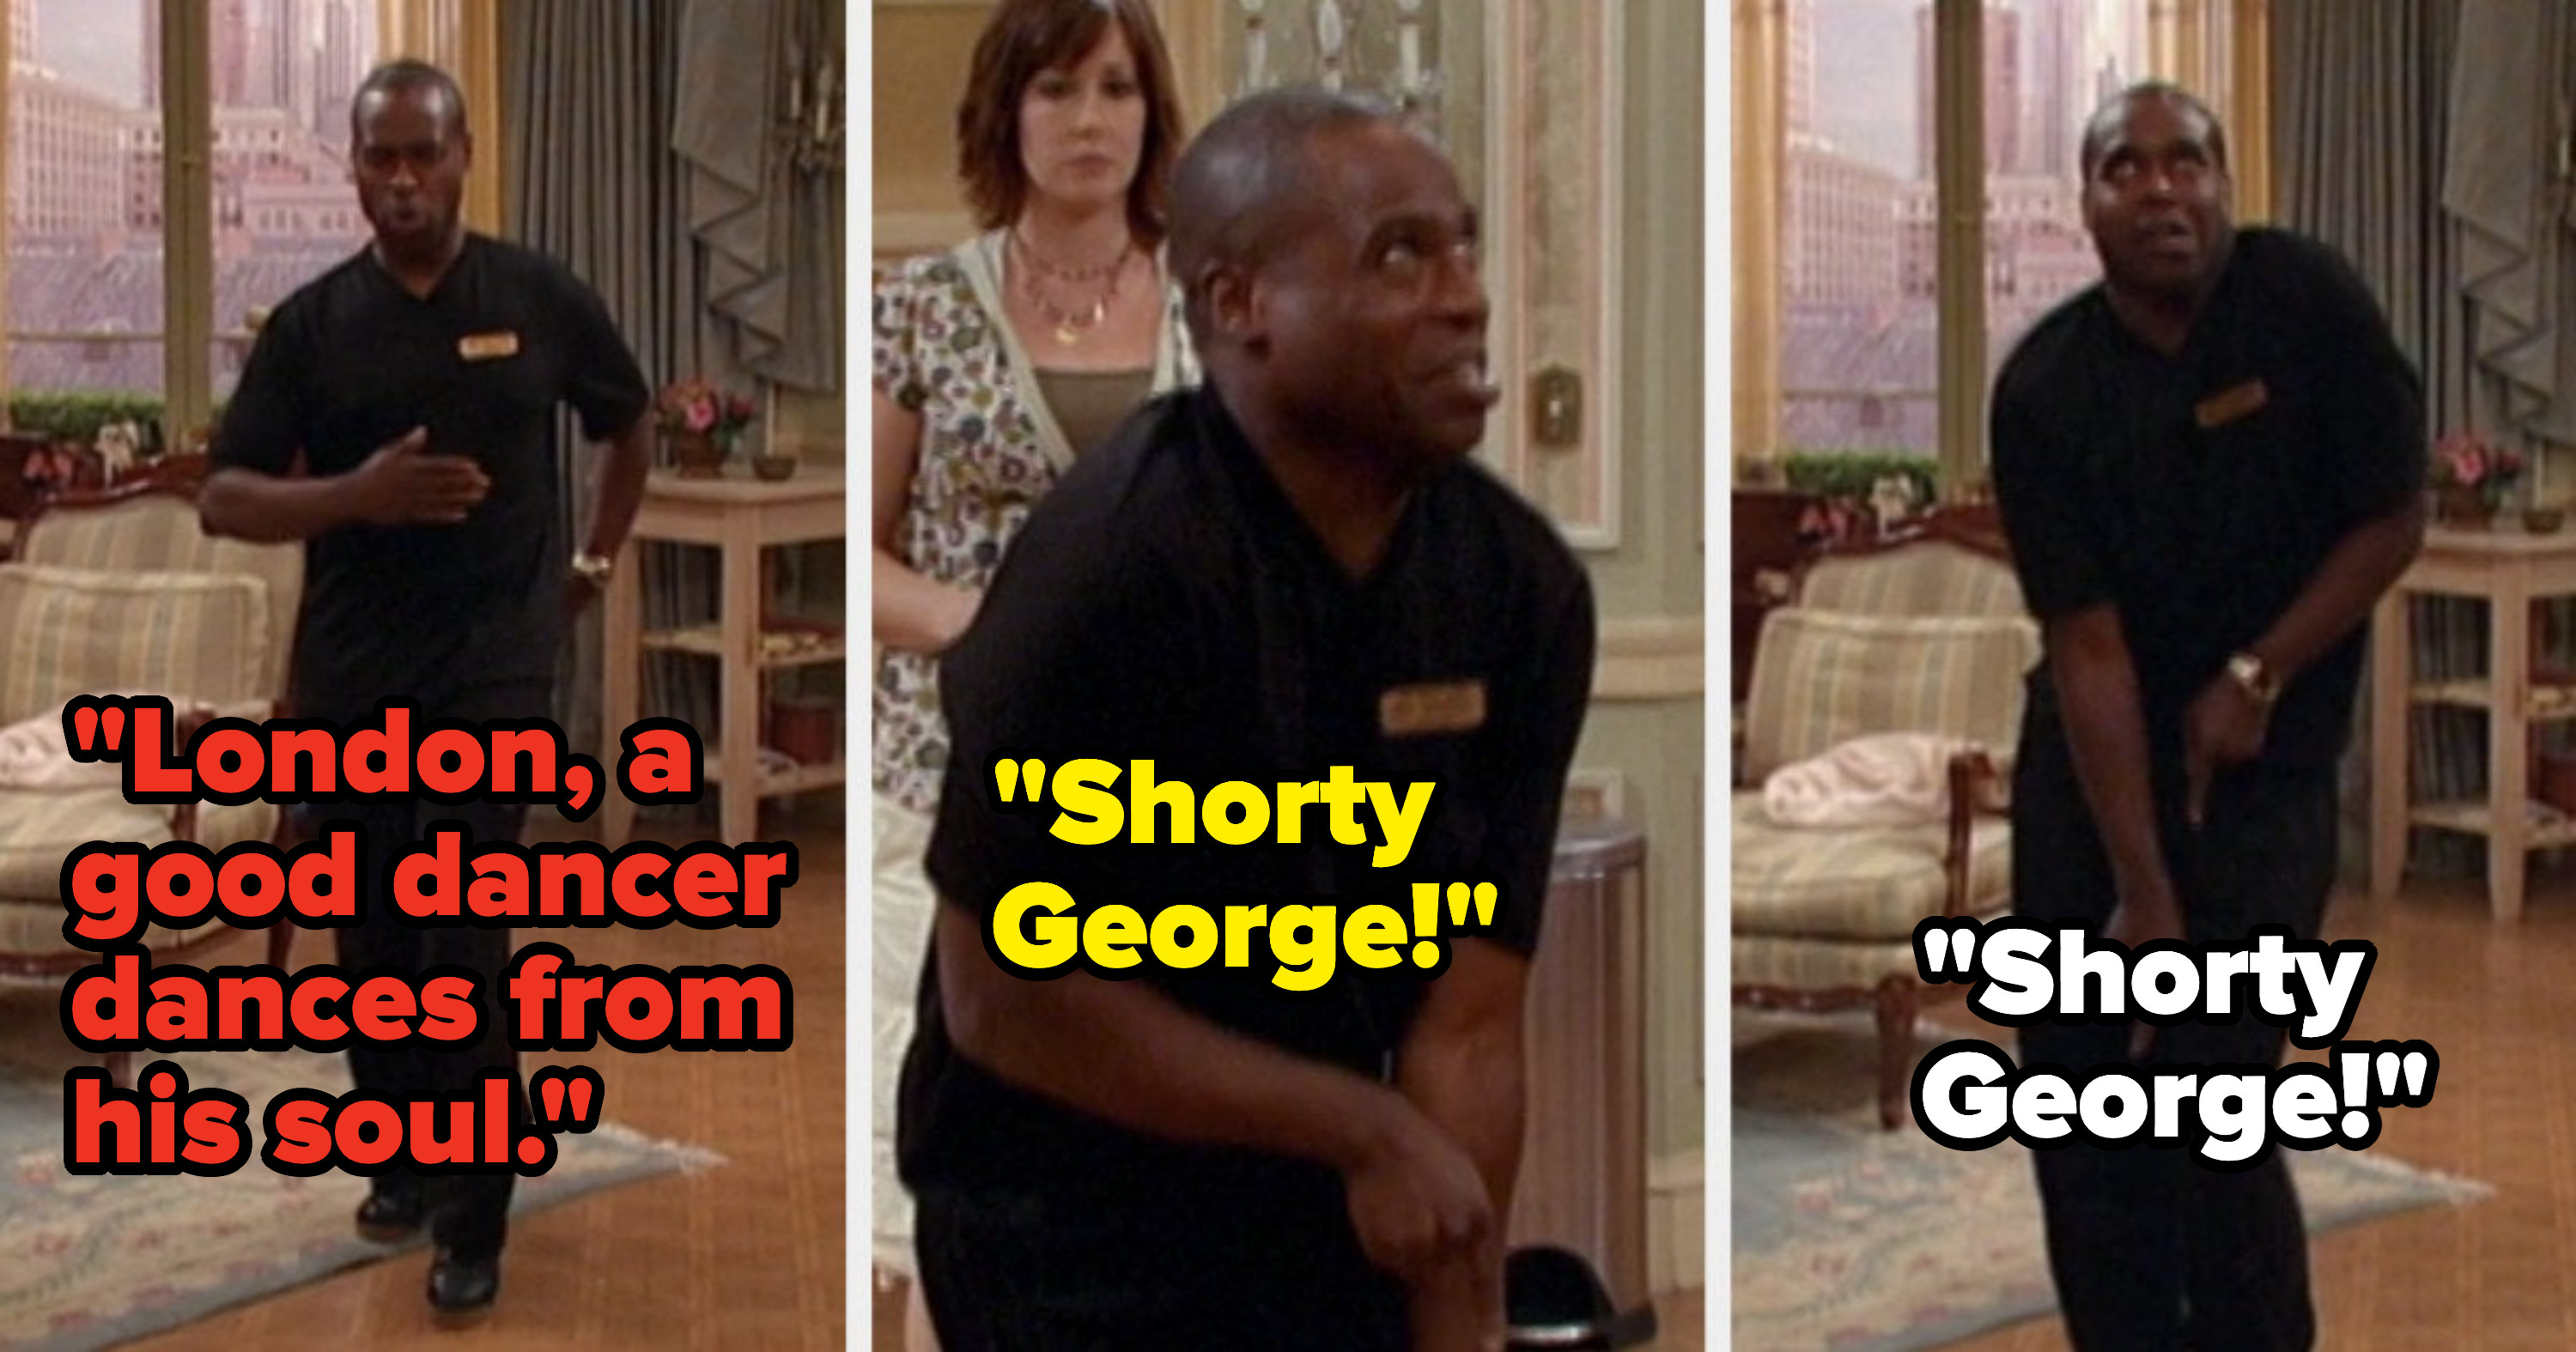 Mr. Moseby teaches London how to dance by demonstrating the Shorty George